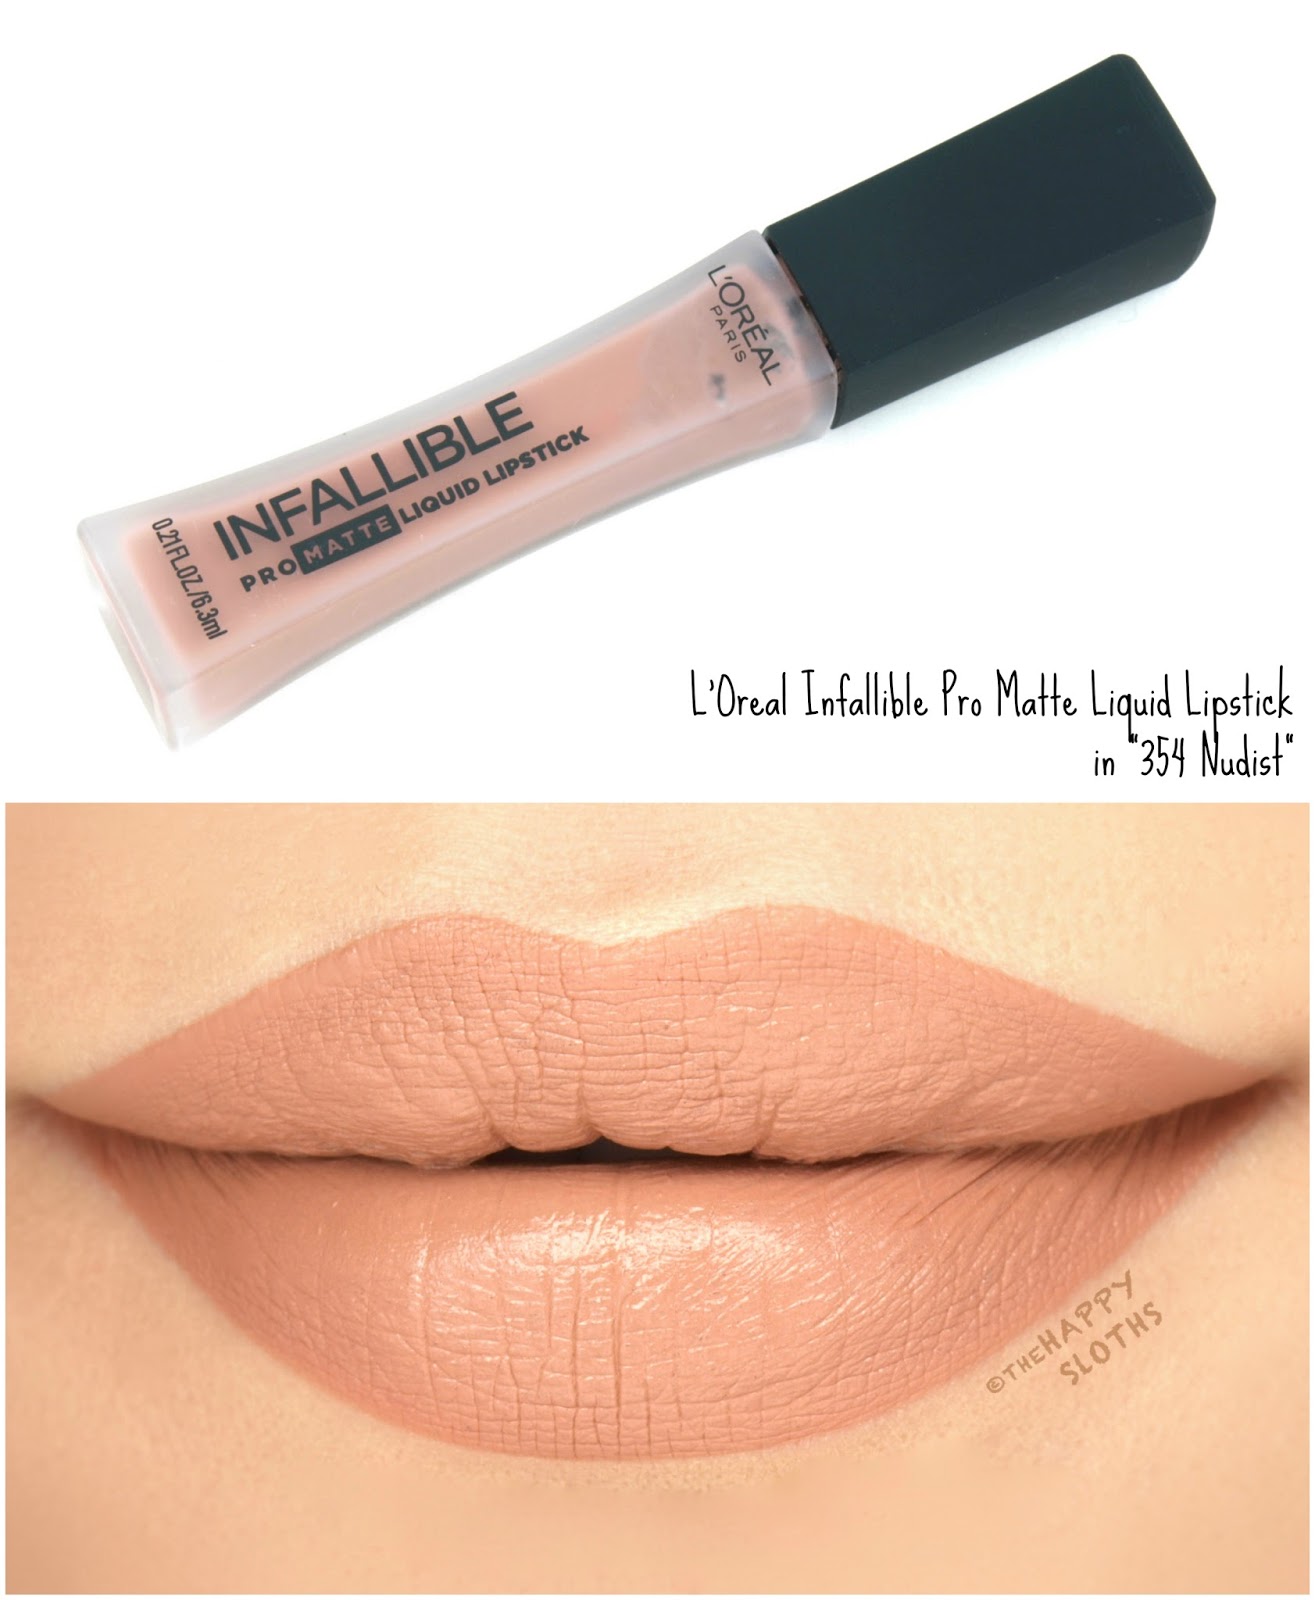 L'Oreal Infallible Pro Matte Liquid Lipsticks "354 Nudist": Review and Swatches